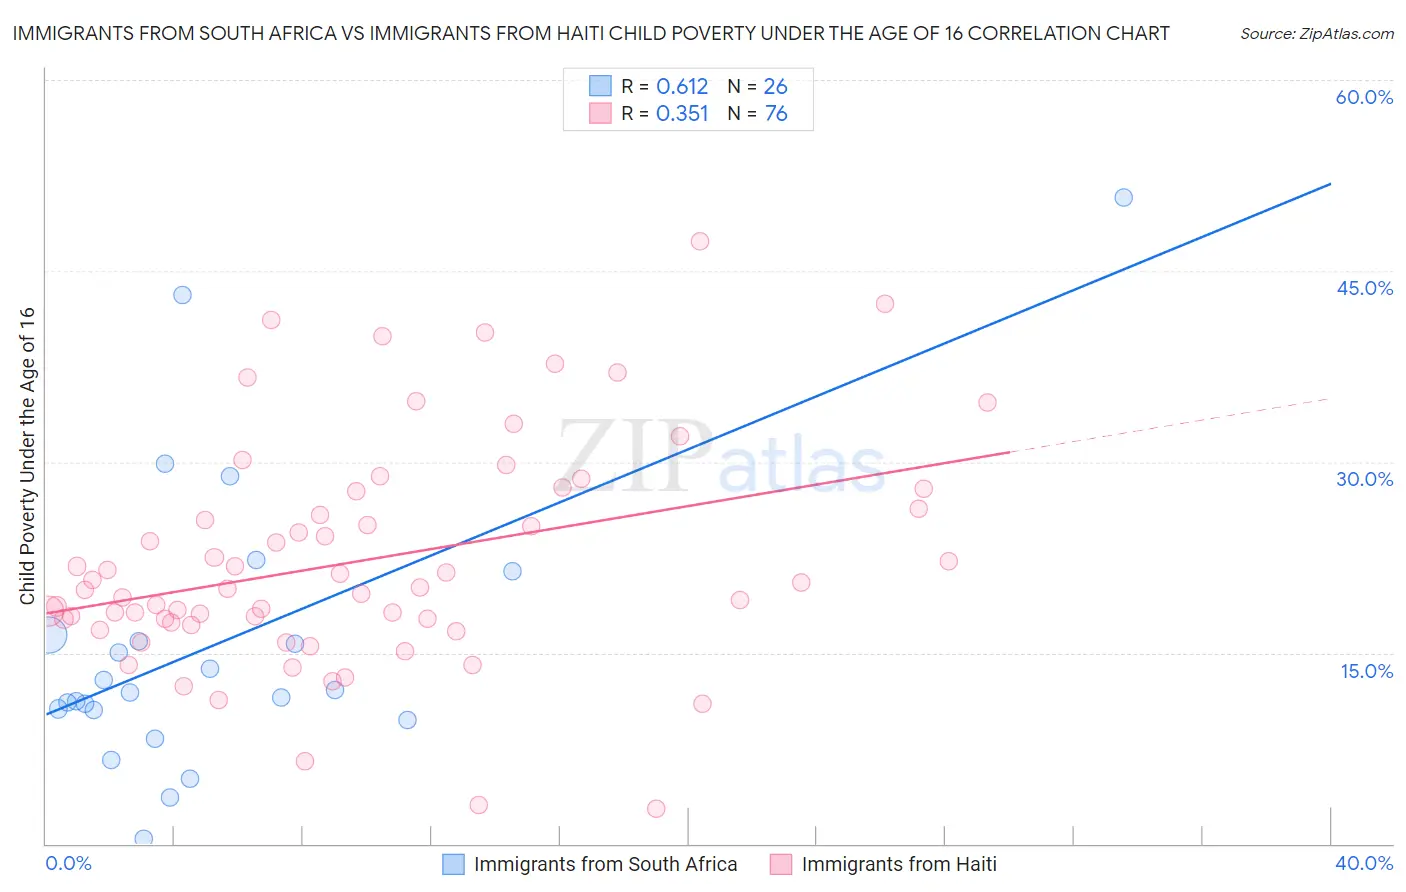 Immigrants from South Africa vs Immigrants from Haiti Child Poverty Under the Age of 16